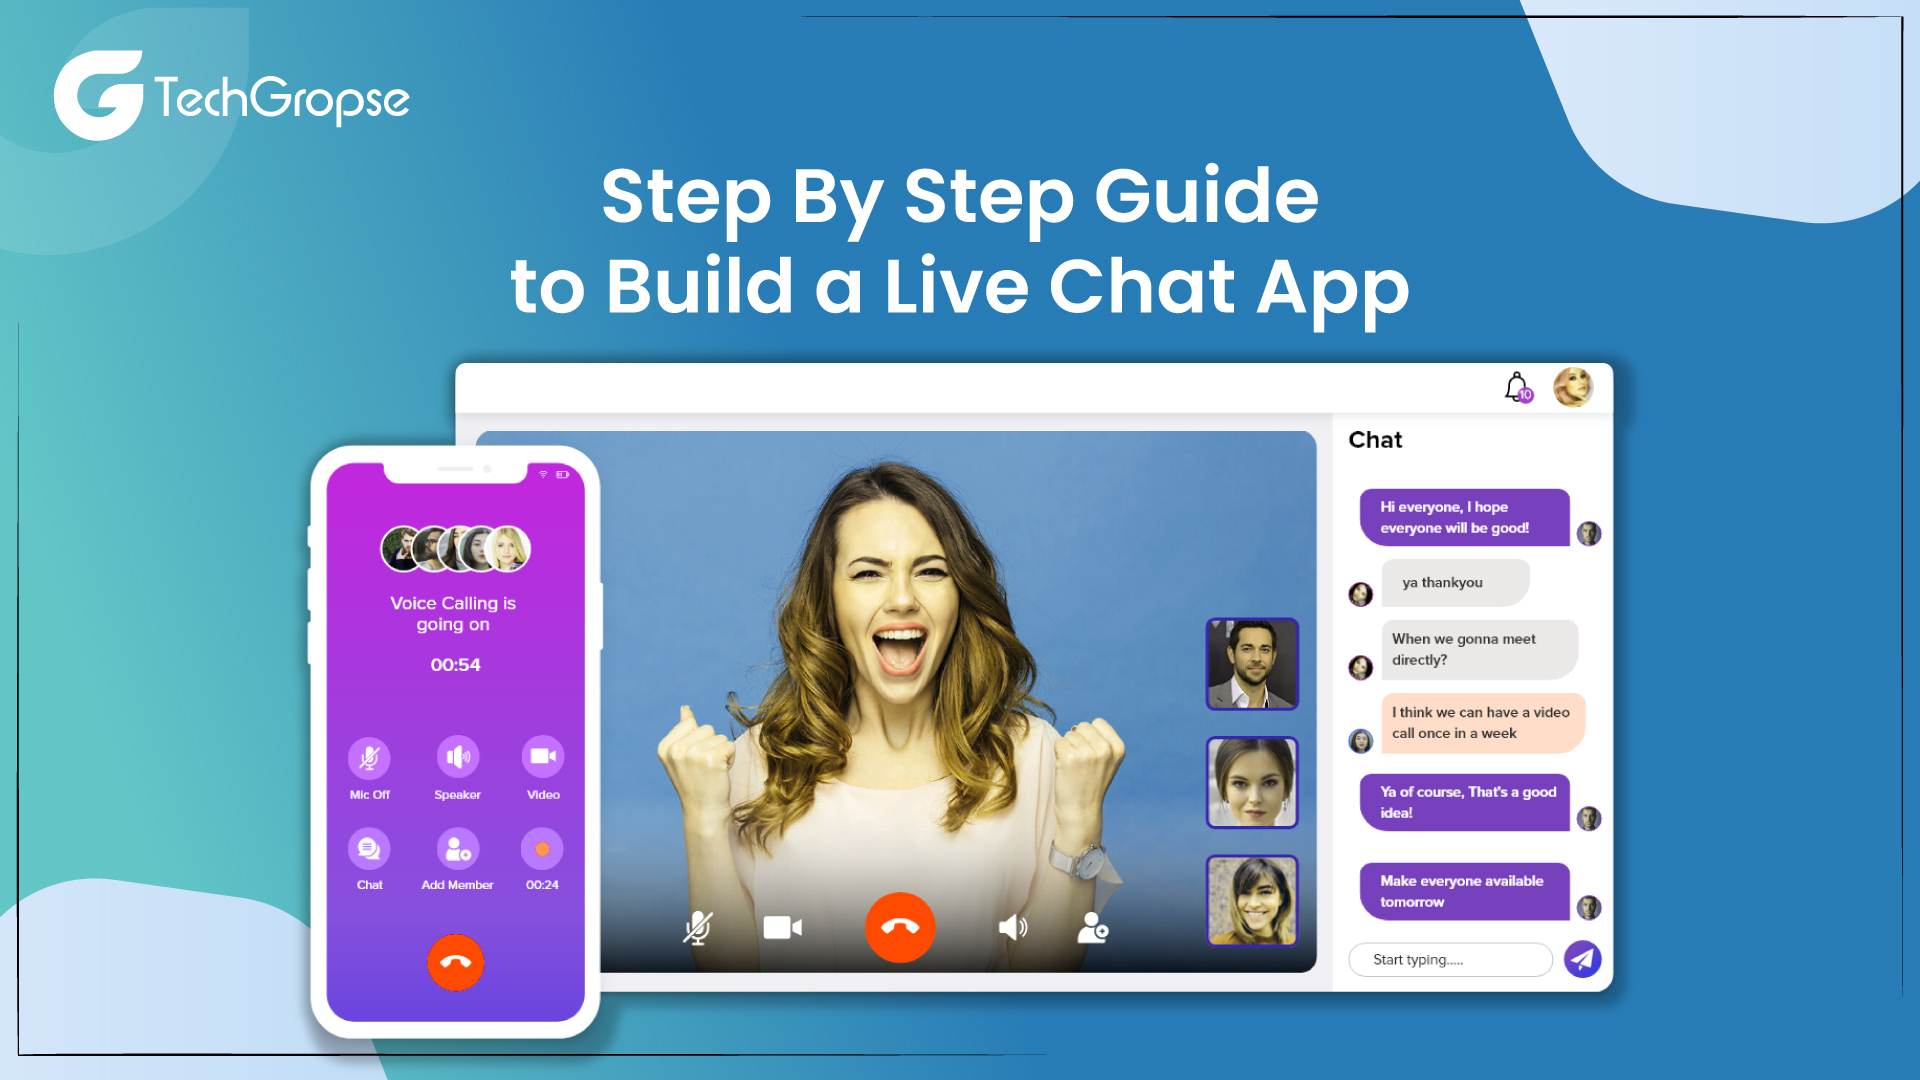 Step By Step Guide to Build a Live Chat App